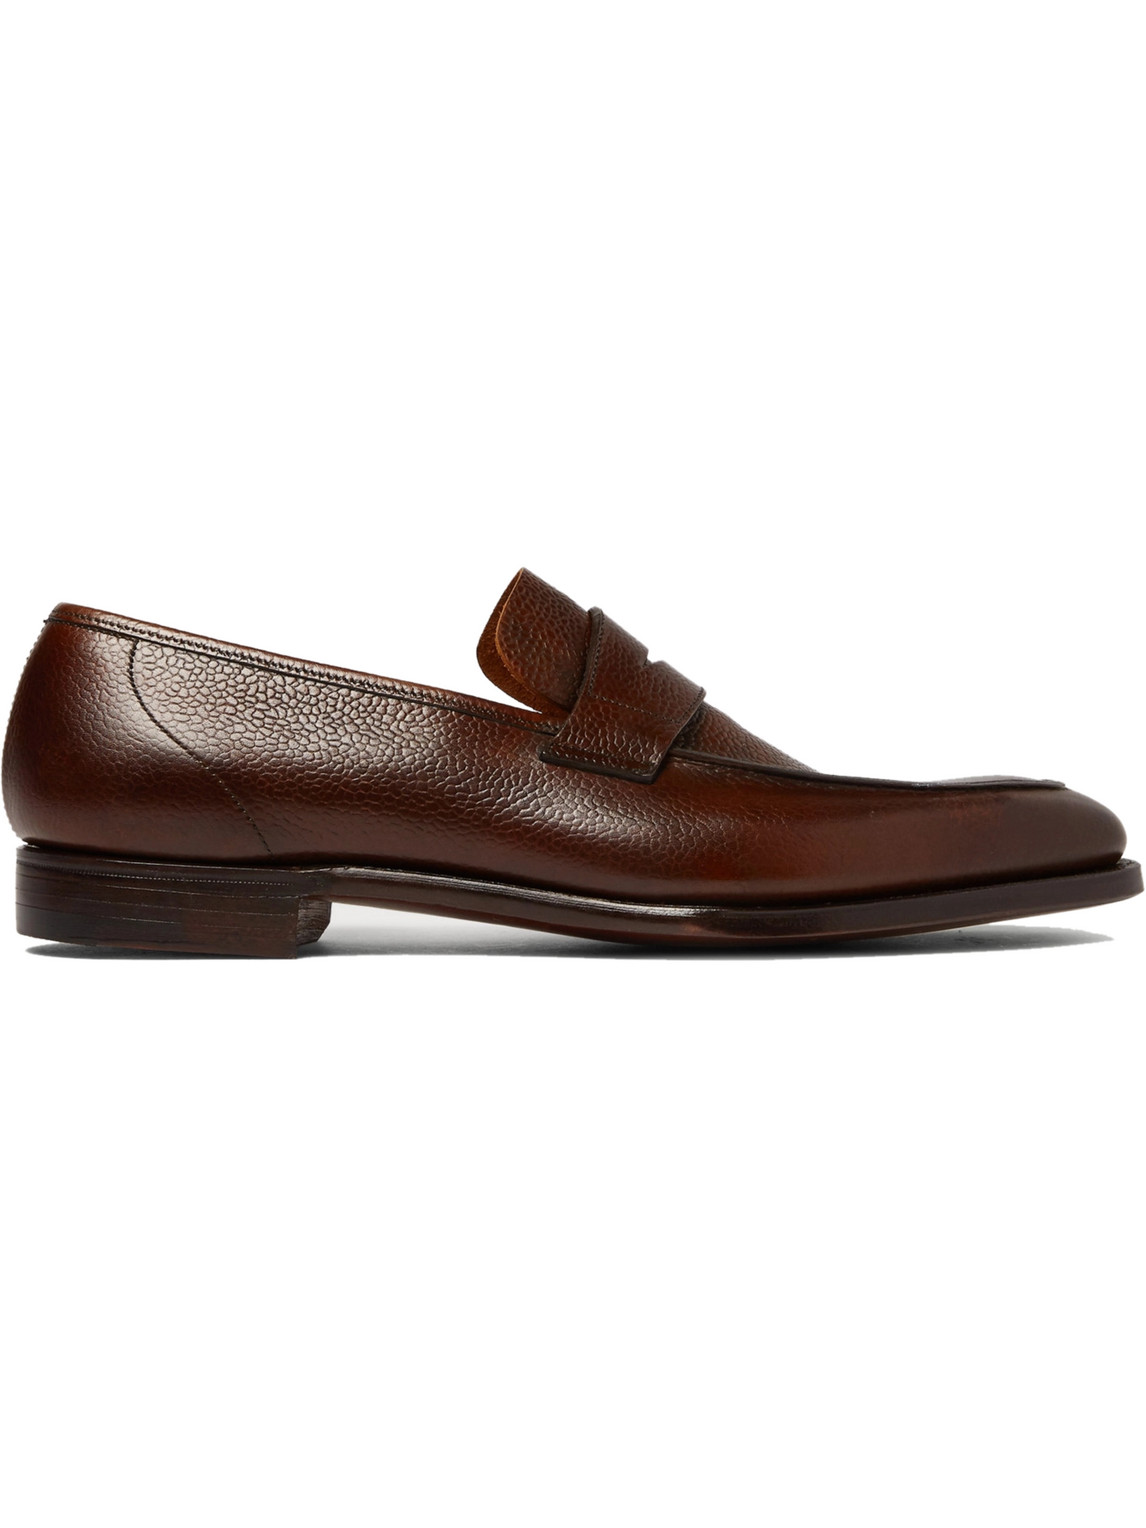 George Full-Grain Leather Penny Loafers